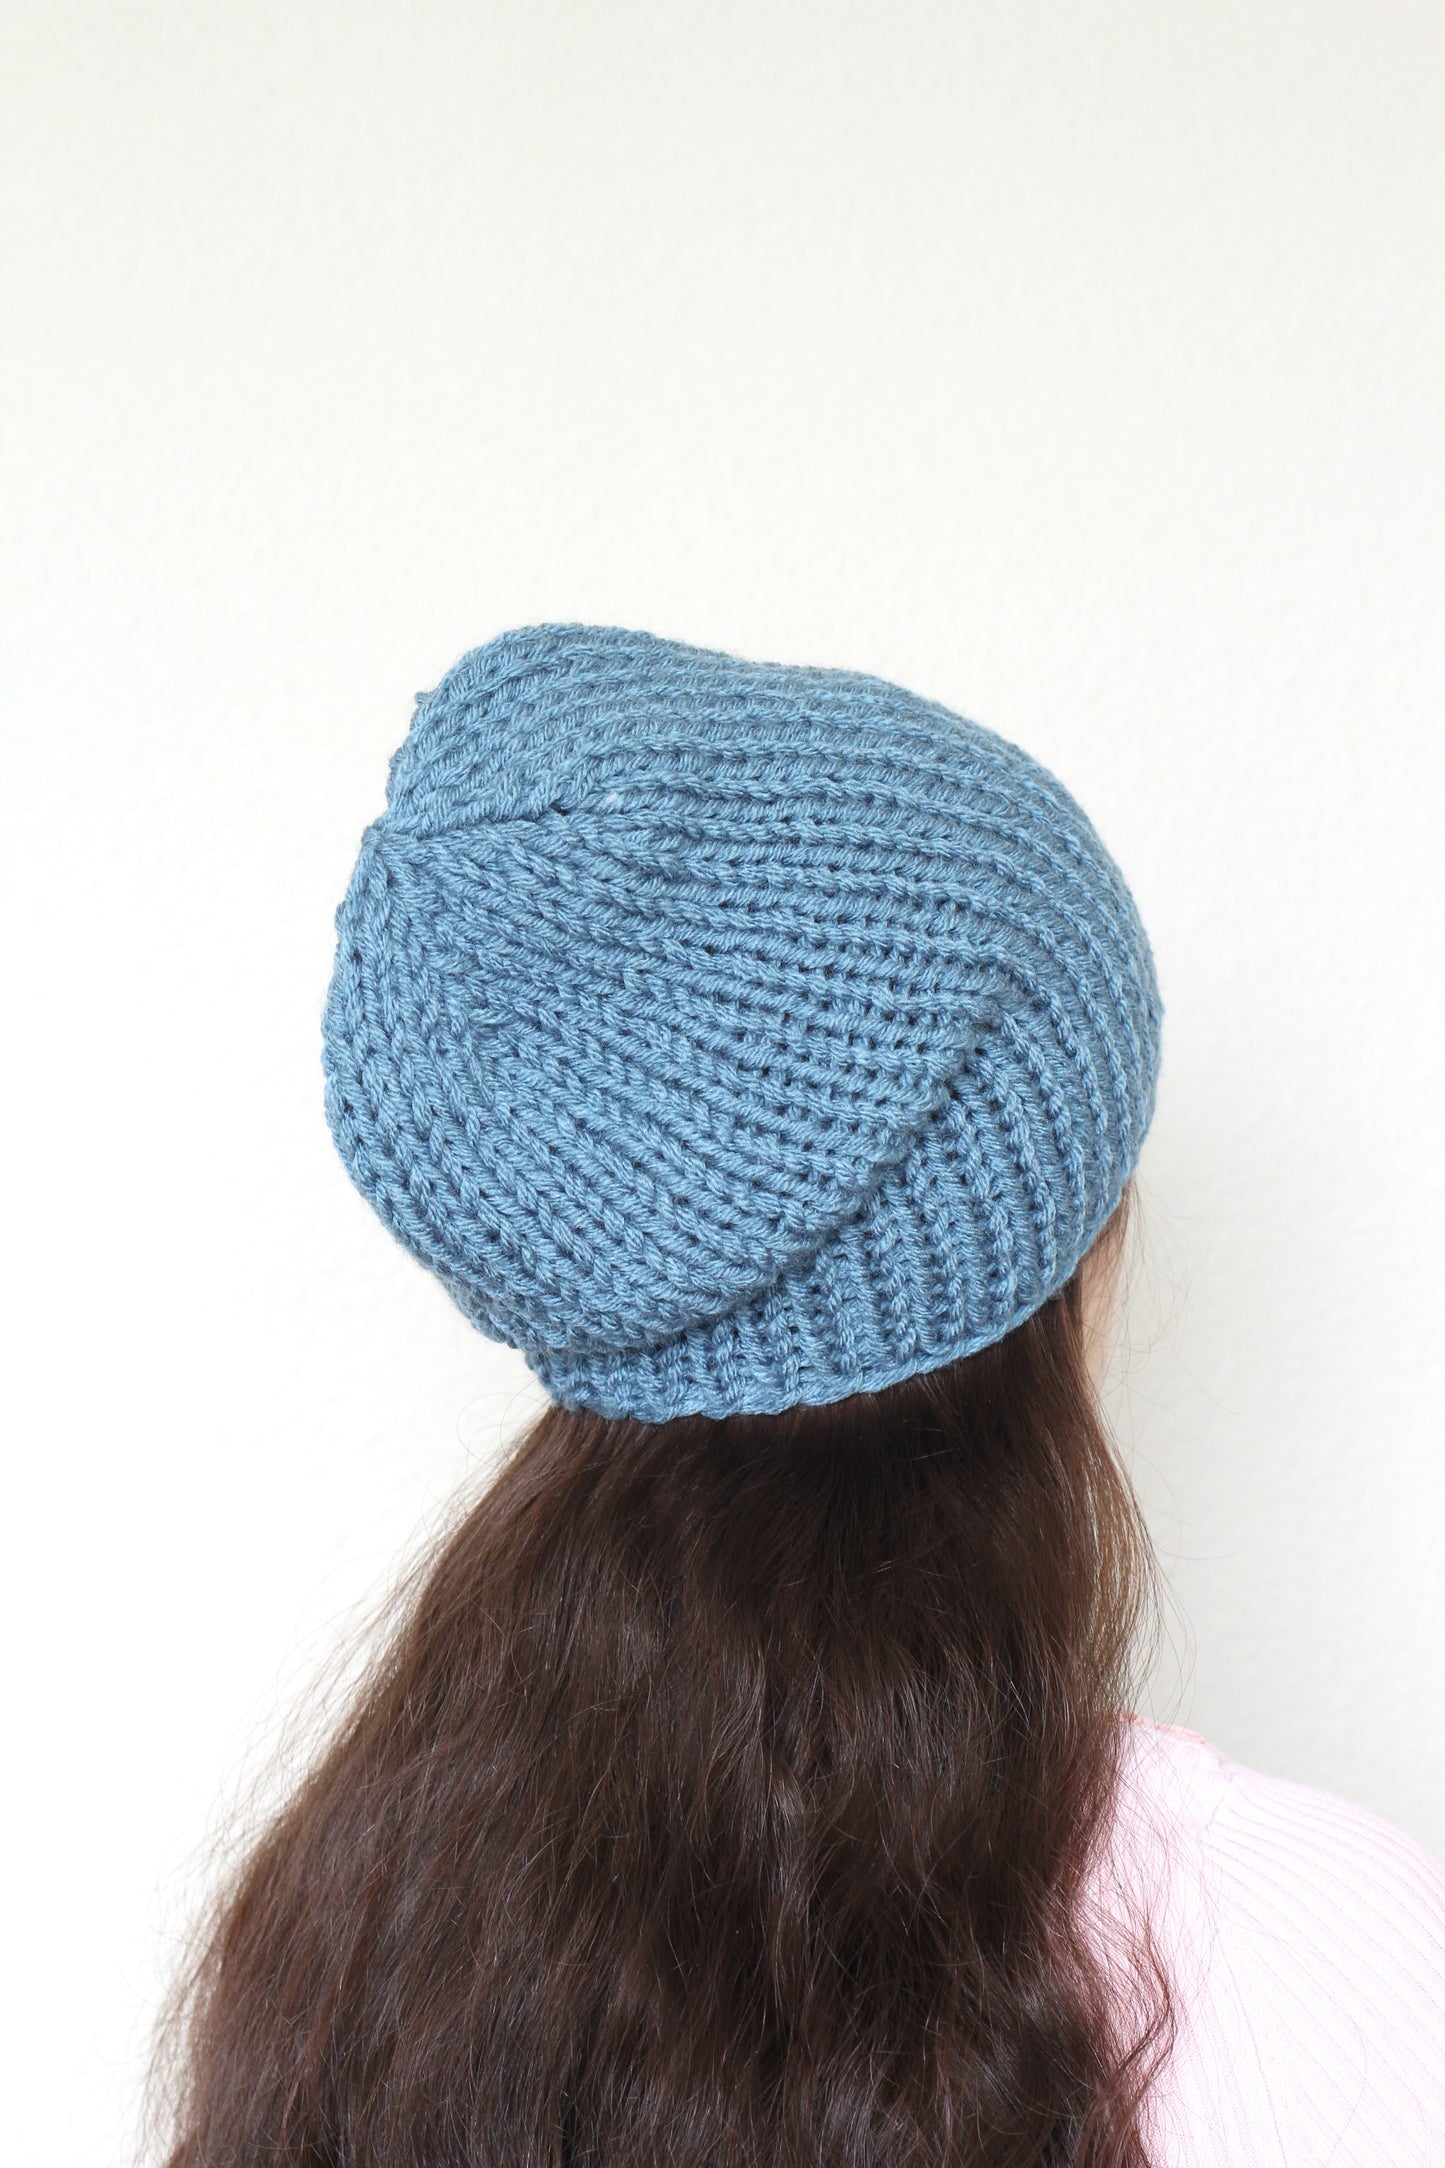 Beanie hat, knit hat, slouchy hat, knit beanie in dark teal color